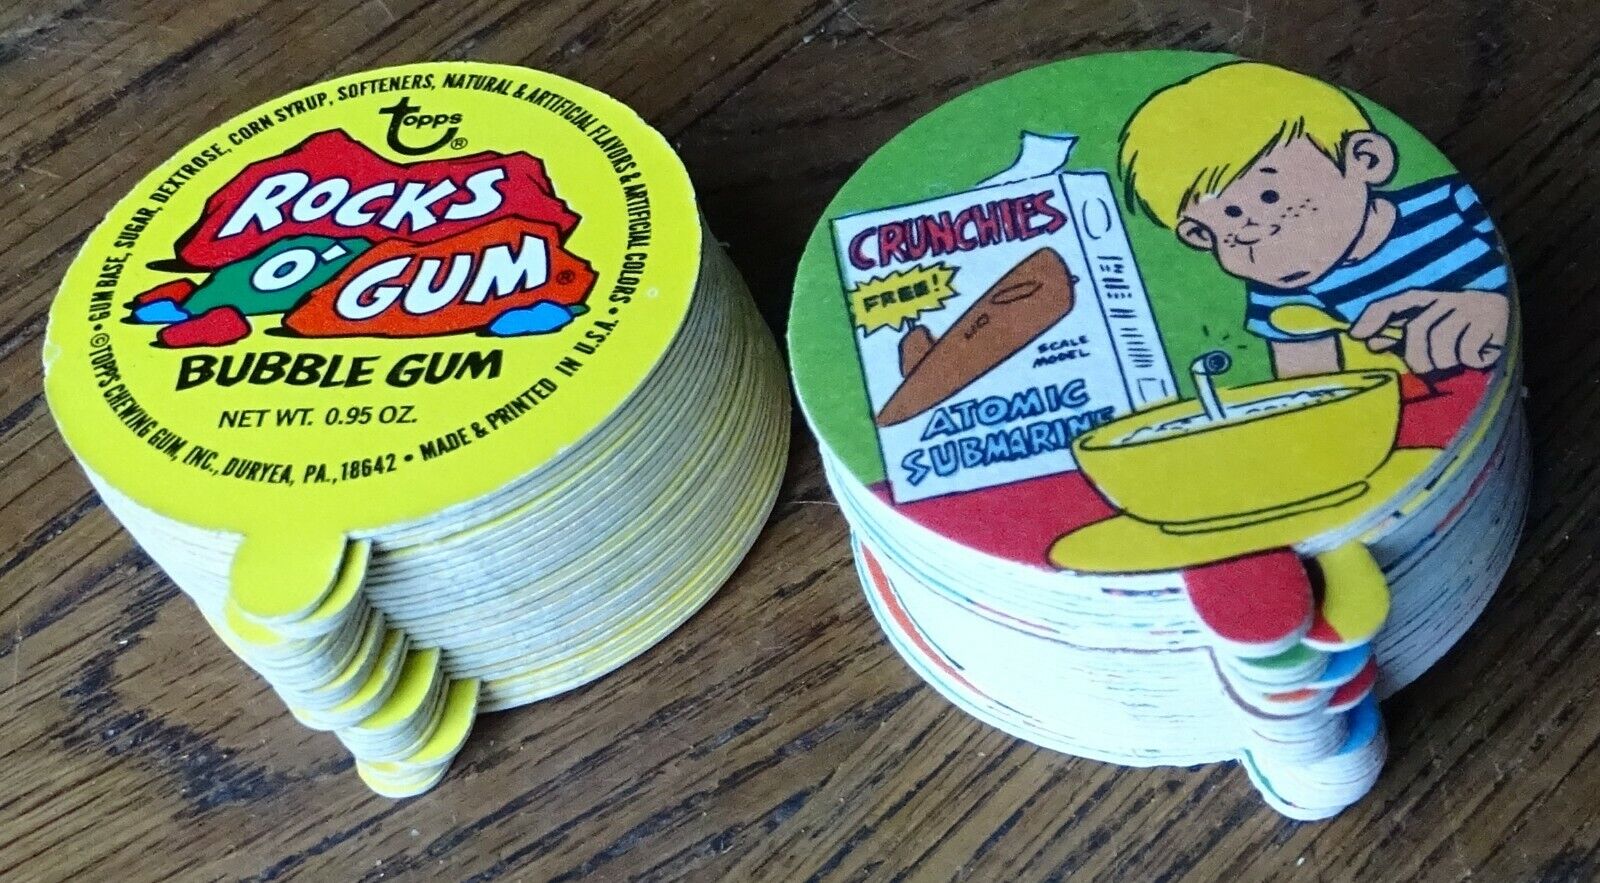 1971 Topps Rock O' Gum Comical Lids (round cards) lot of 55 (may be set)